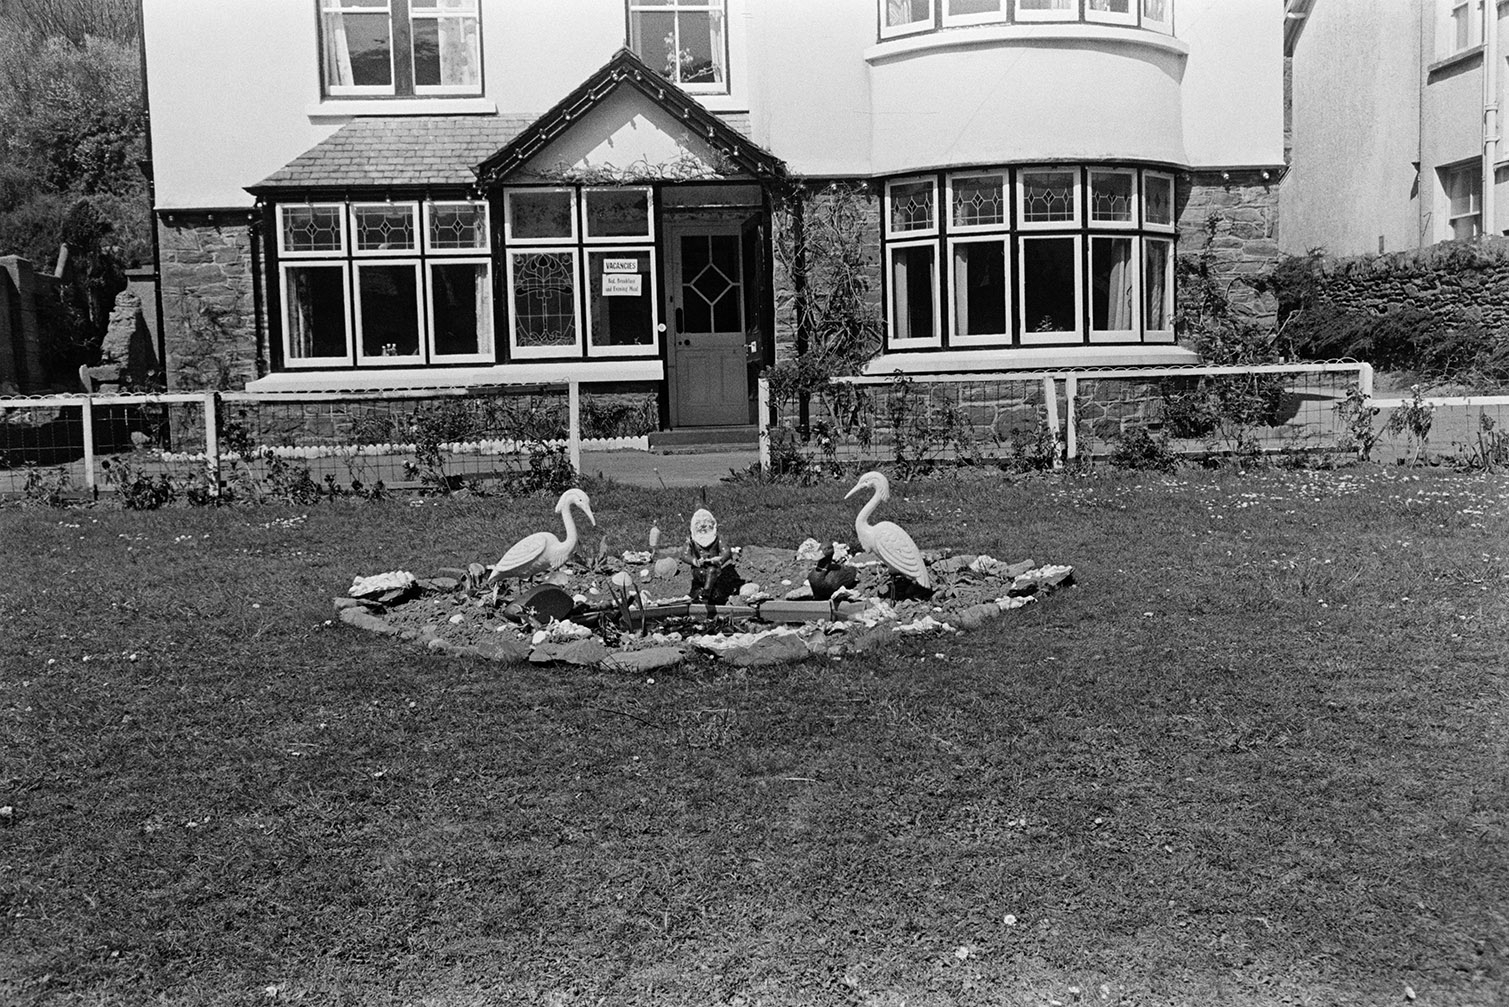 A B&B and garden with a pond in Lynton. The pond is surround by a gnome and two heron statues. A 'Vacancies' sign is visible in the window by the front door.